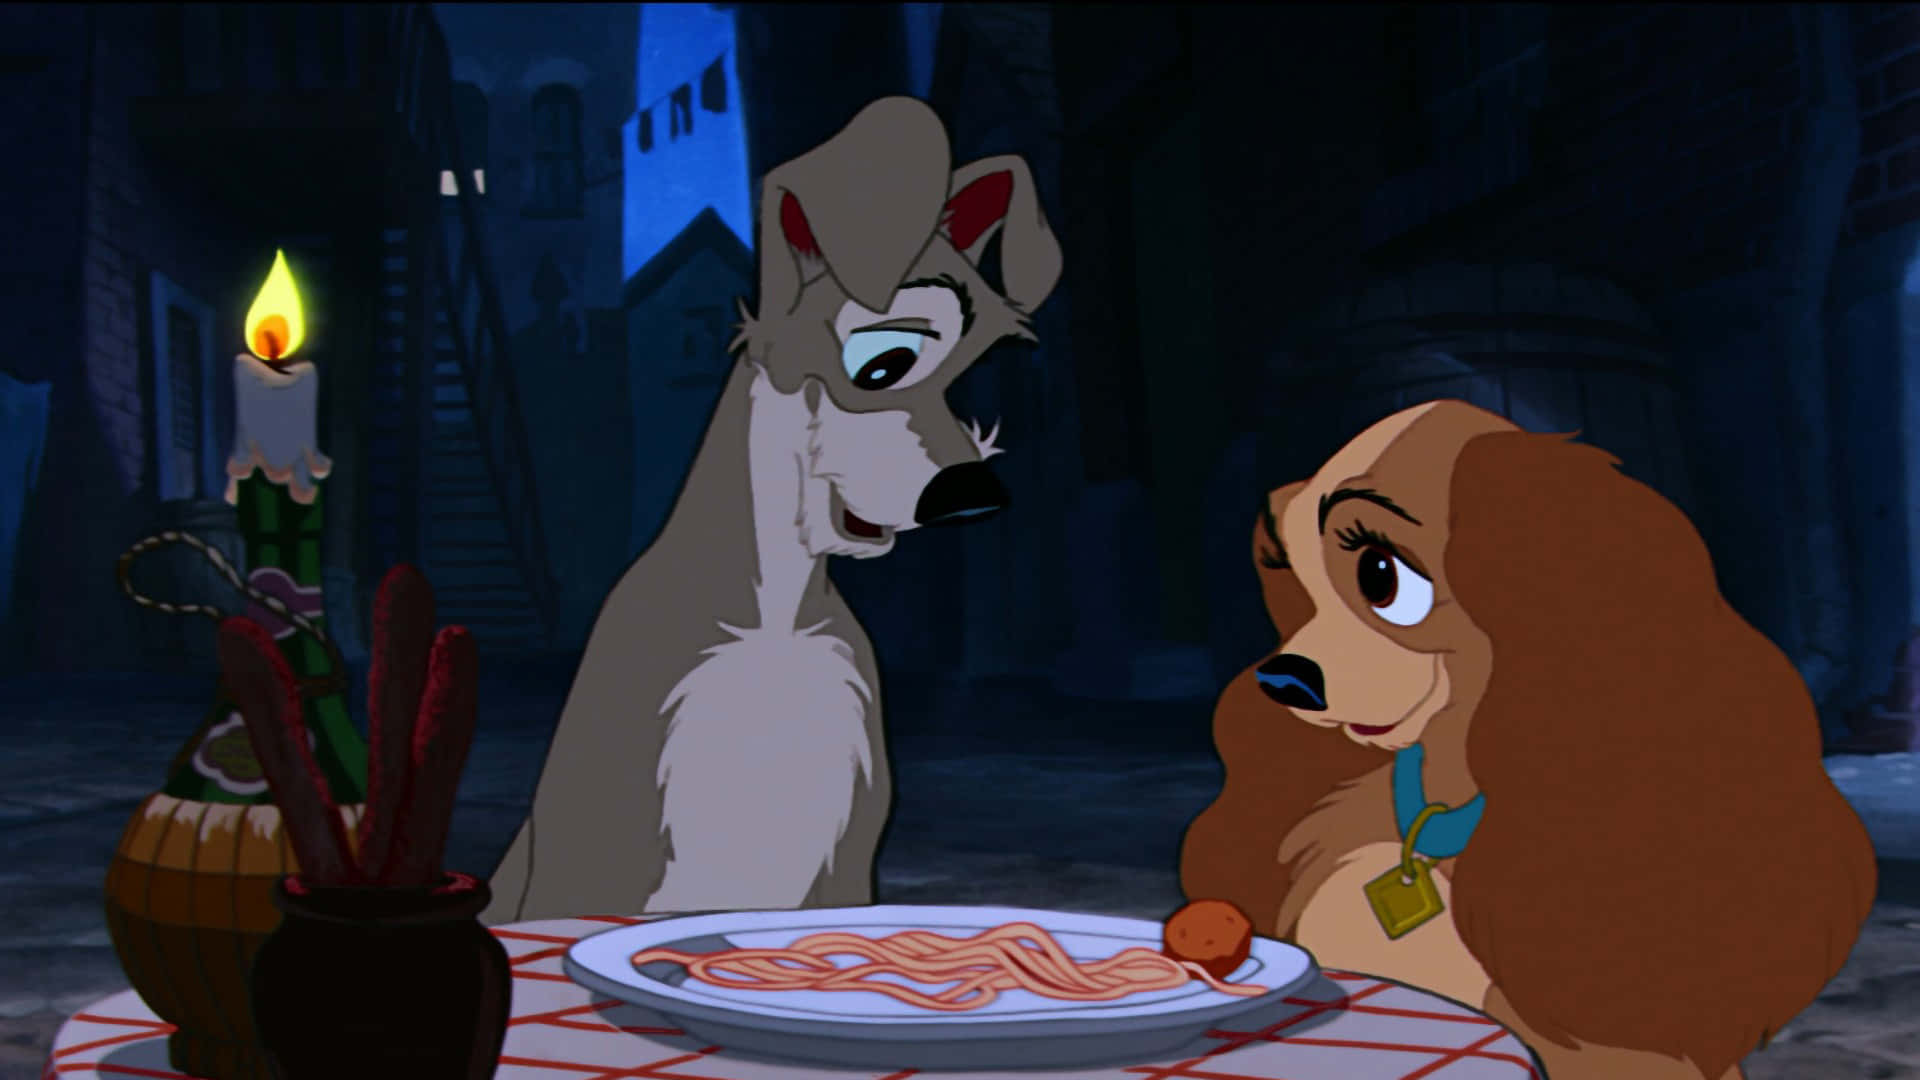 Romantic Spaghetti Dinner - Lady And The Tramp